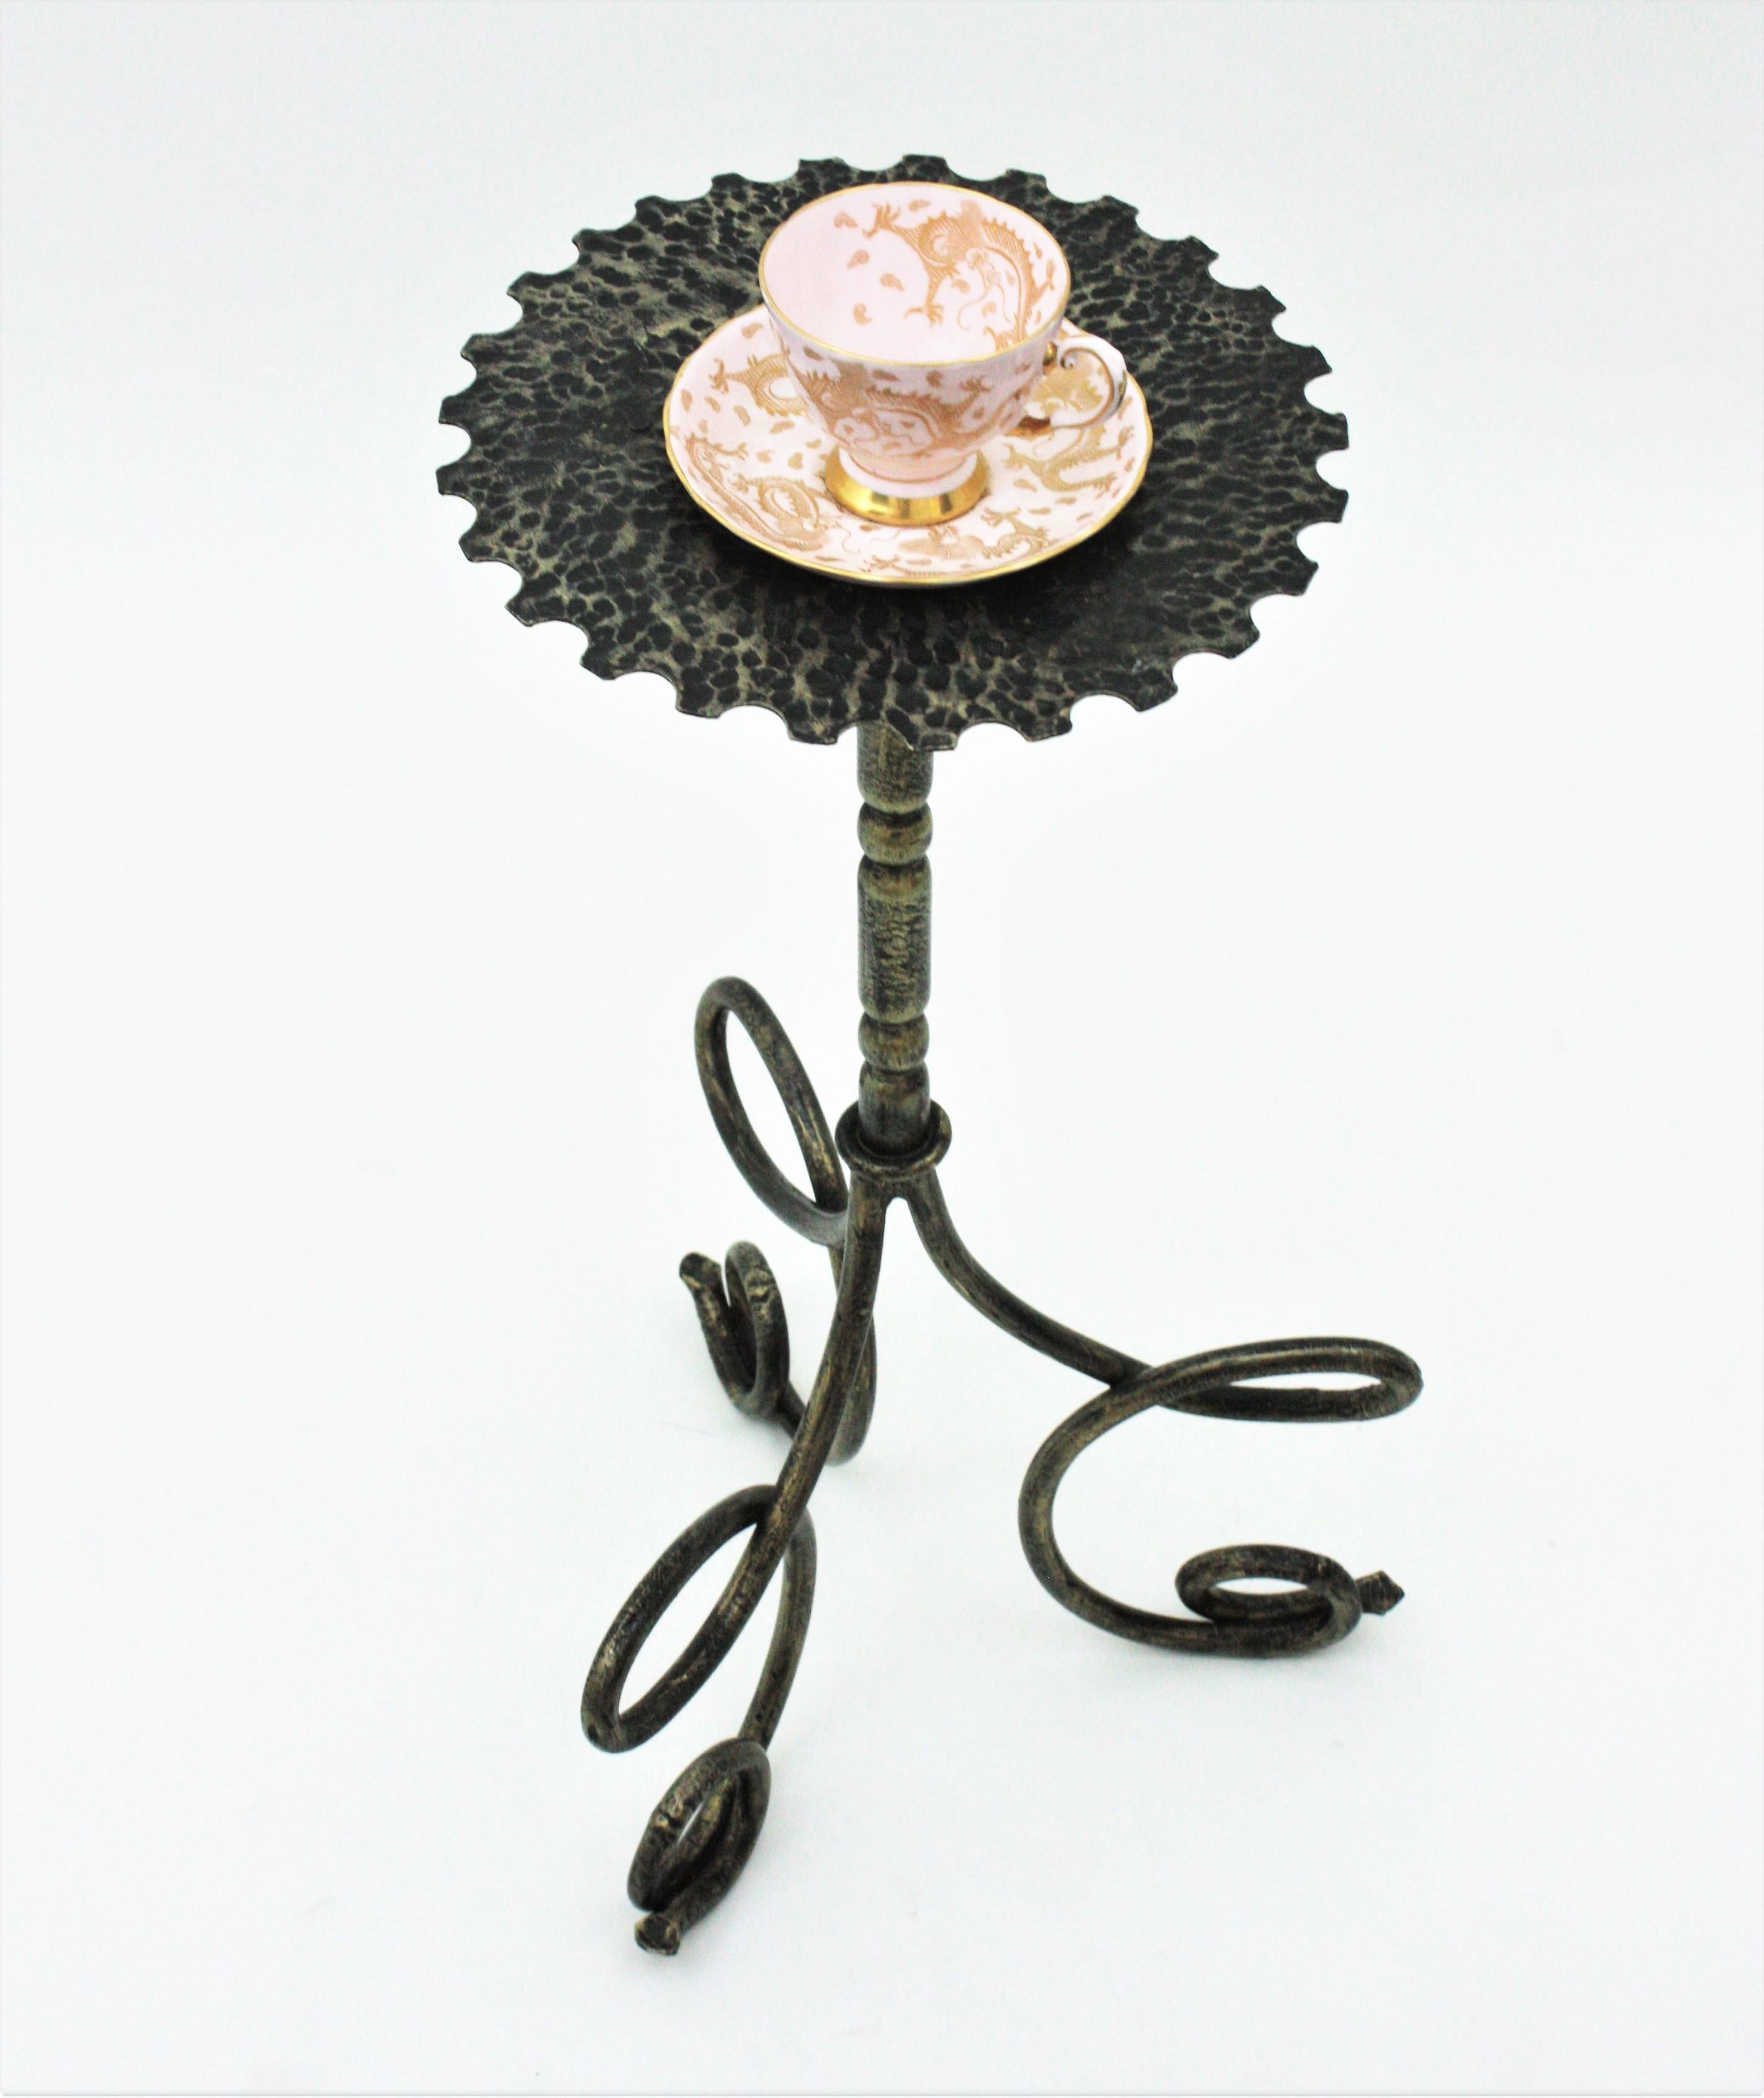 Hand Forged Iron Martini Table by Ferro Art, Spain, 1950s
Spanish Wrought Iron Drinks Table Gueridon, End or Side Table.
This hand-crafted table was manufactured by a well-known Spanish maker. It is heavily adorned by the hammer marks thorough. The